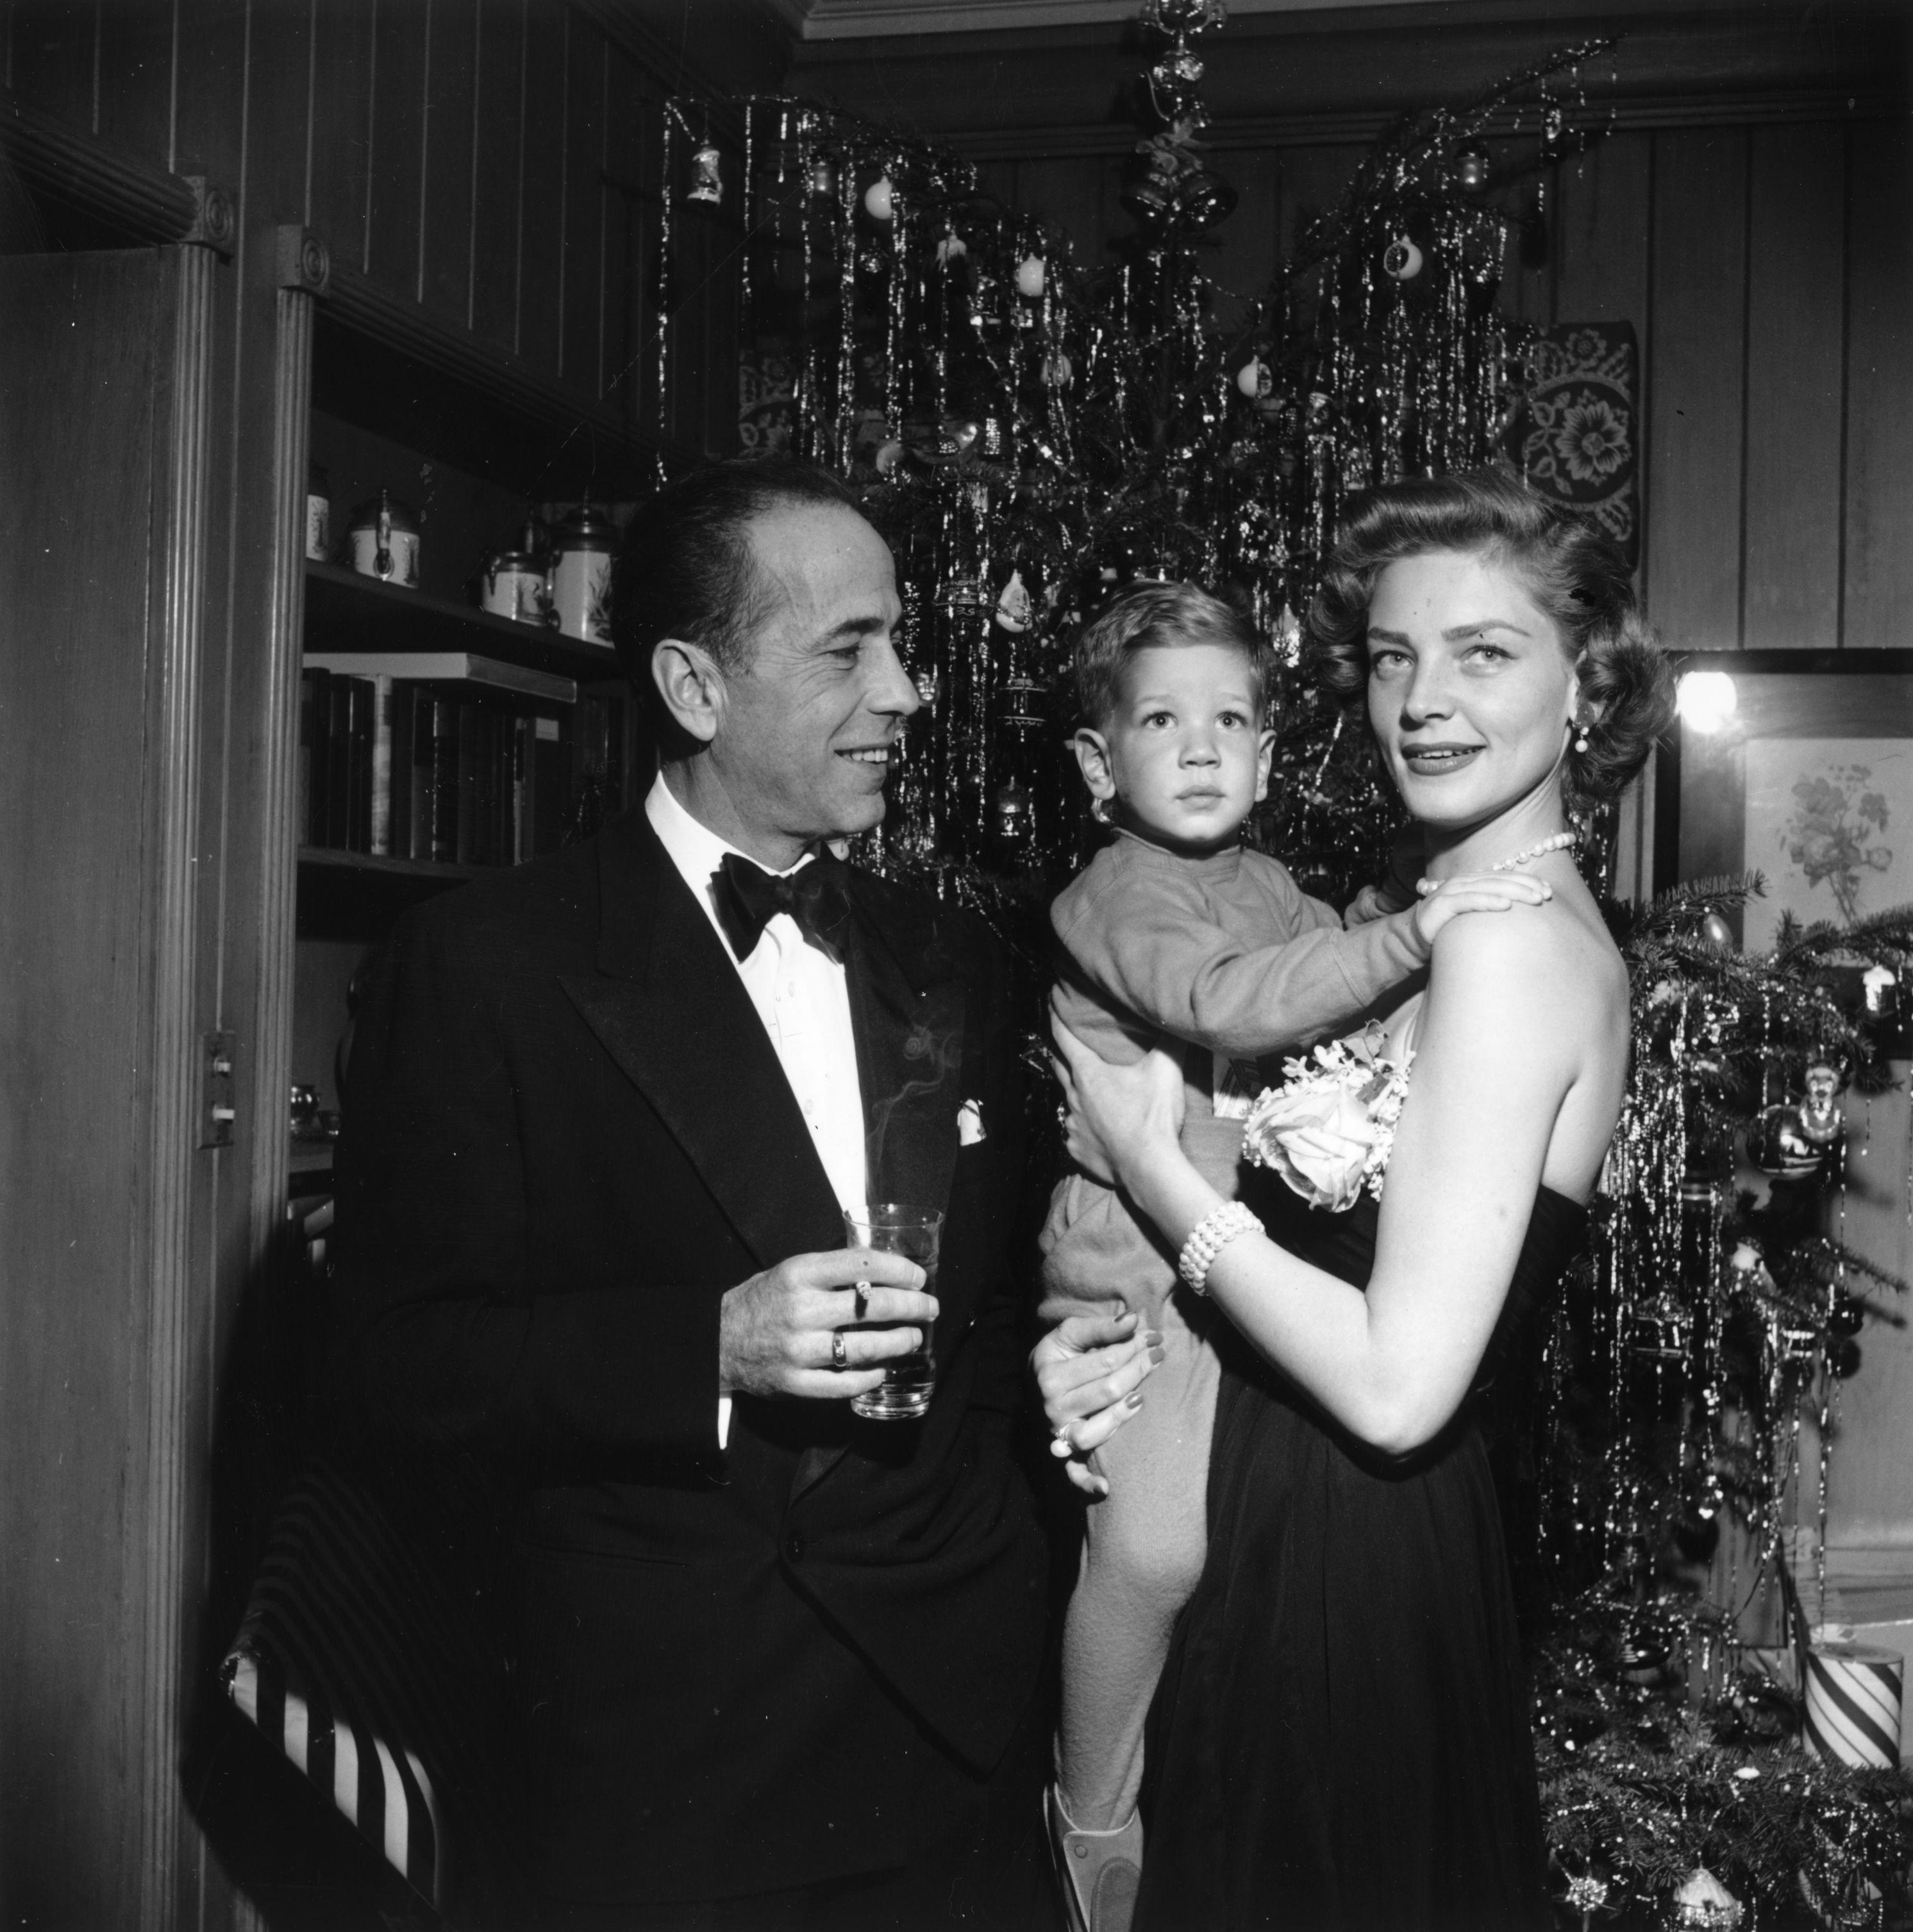 American actor Humphrey Bogart (1899 - 1957) with his wife Lauren Bacall and their son Stephen at their home in Beverly Hills in California on Christmas Eve. 

Signed in black archival ink on recto, bottom right. Numbered in black archival ink on